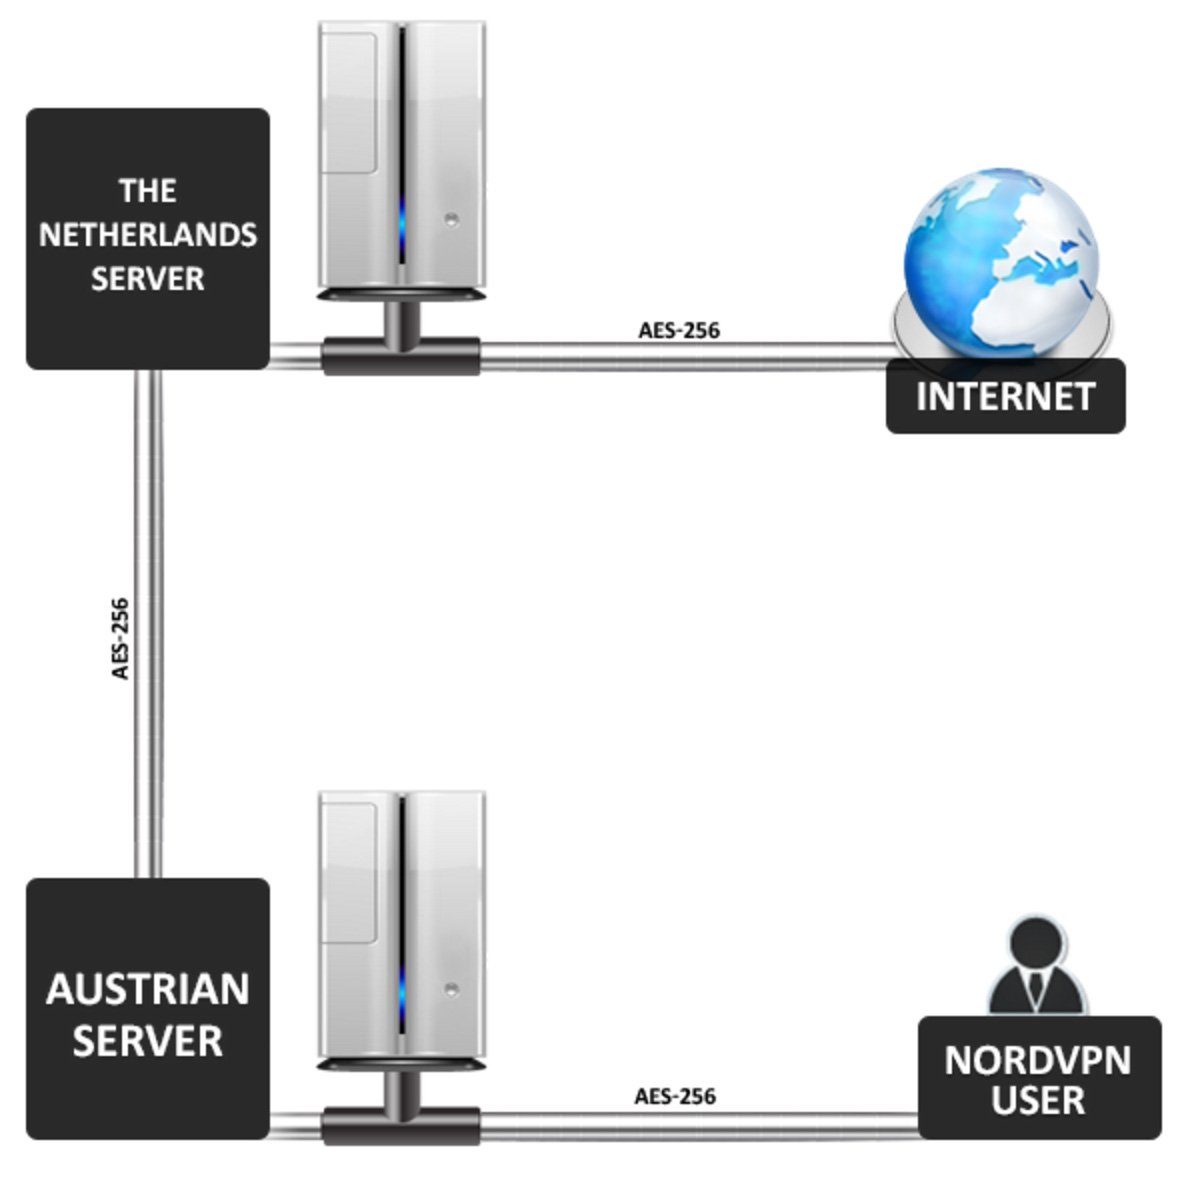 How the double VPN works